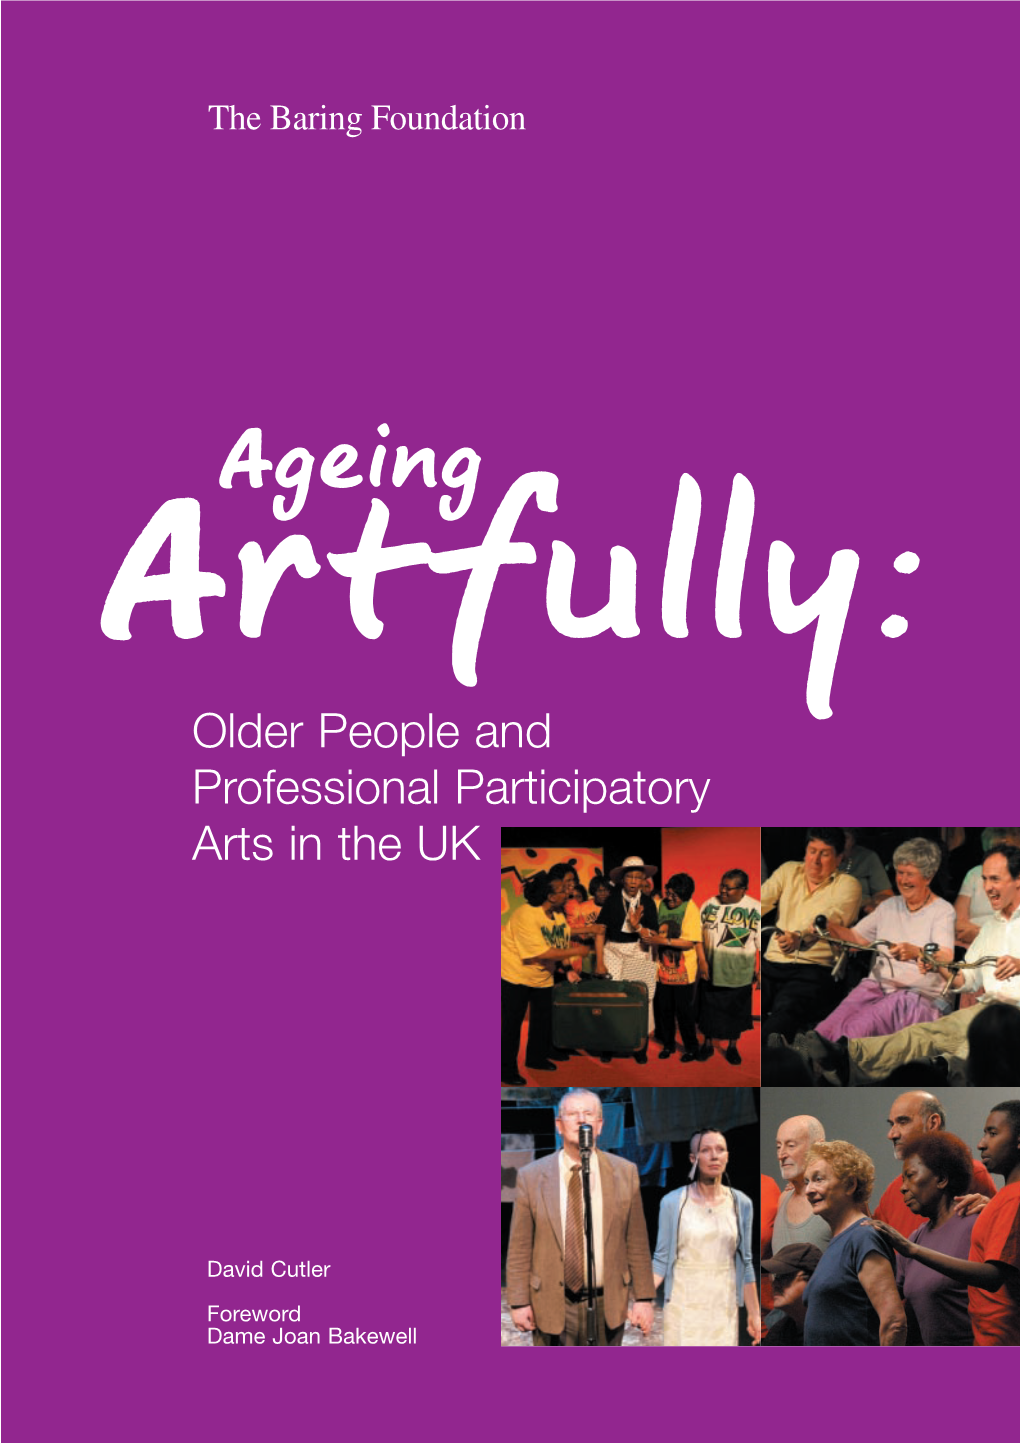 Older People and Professional Participatory Arts in the UK